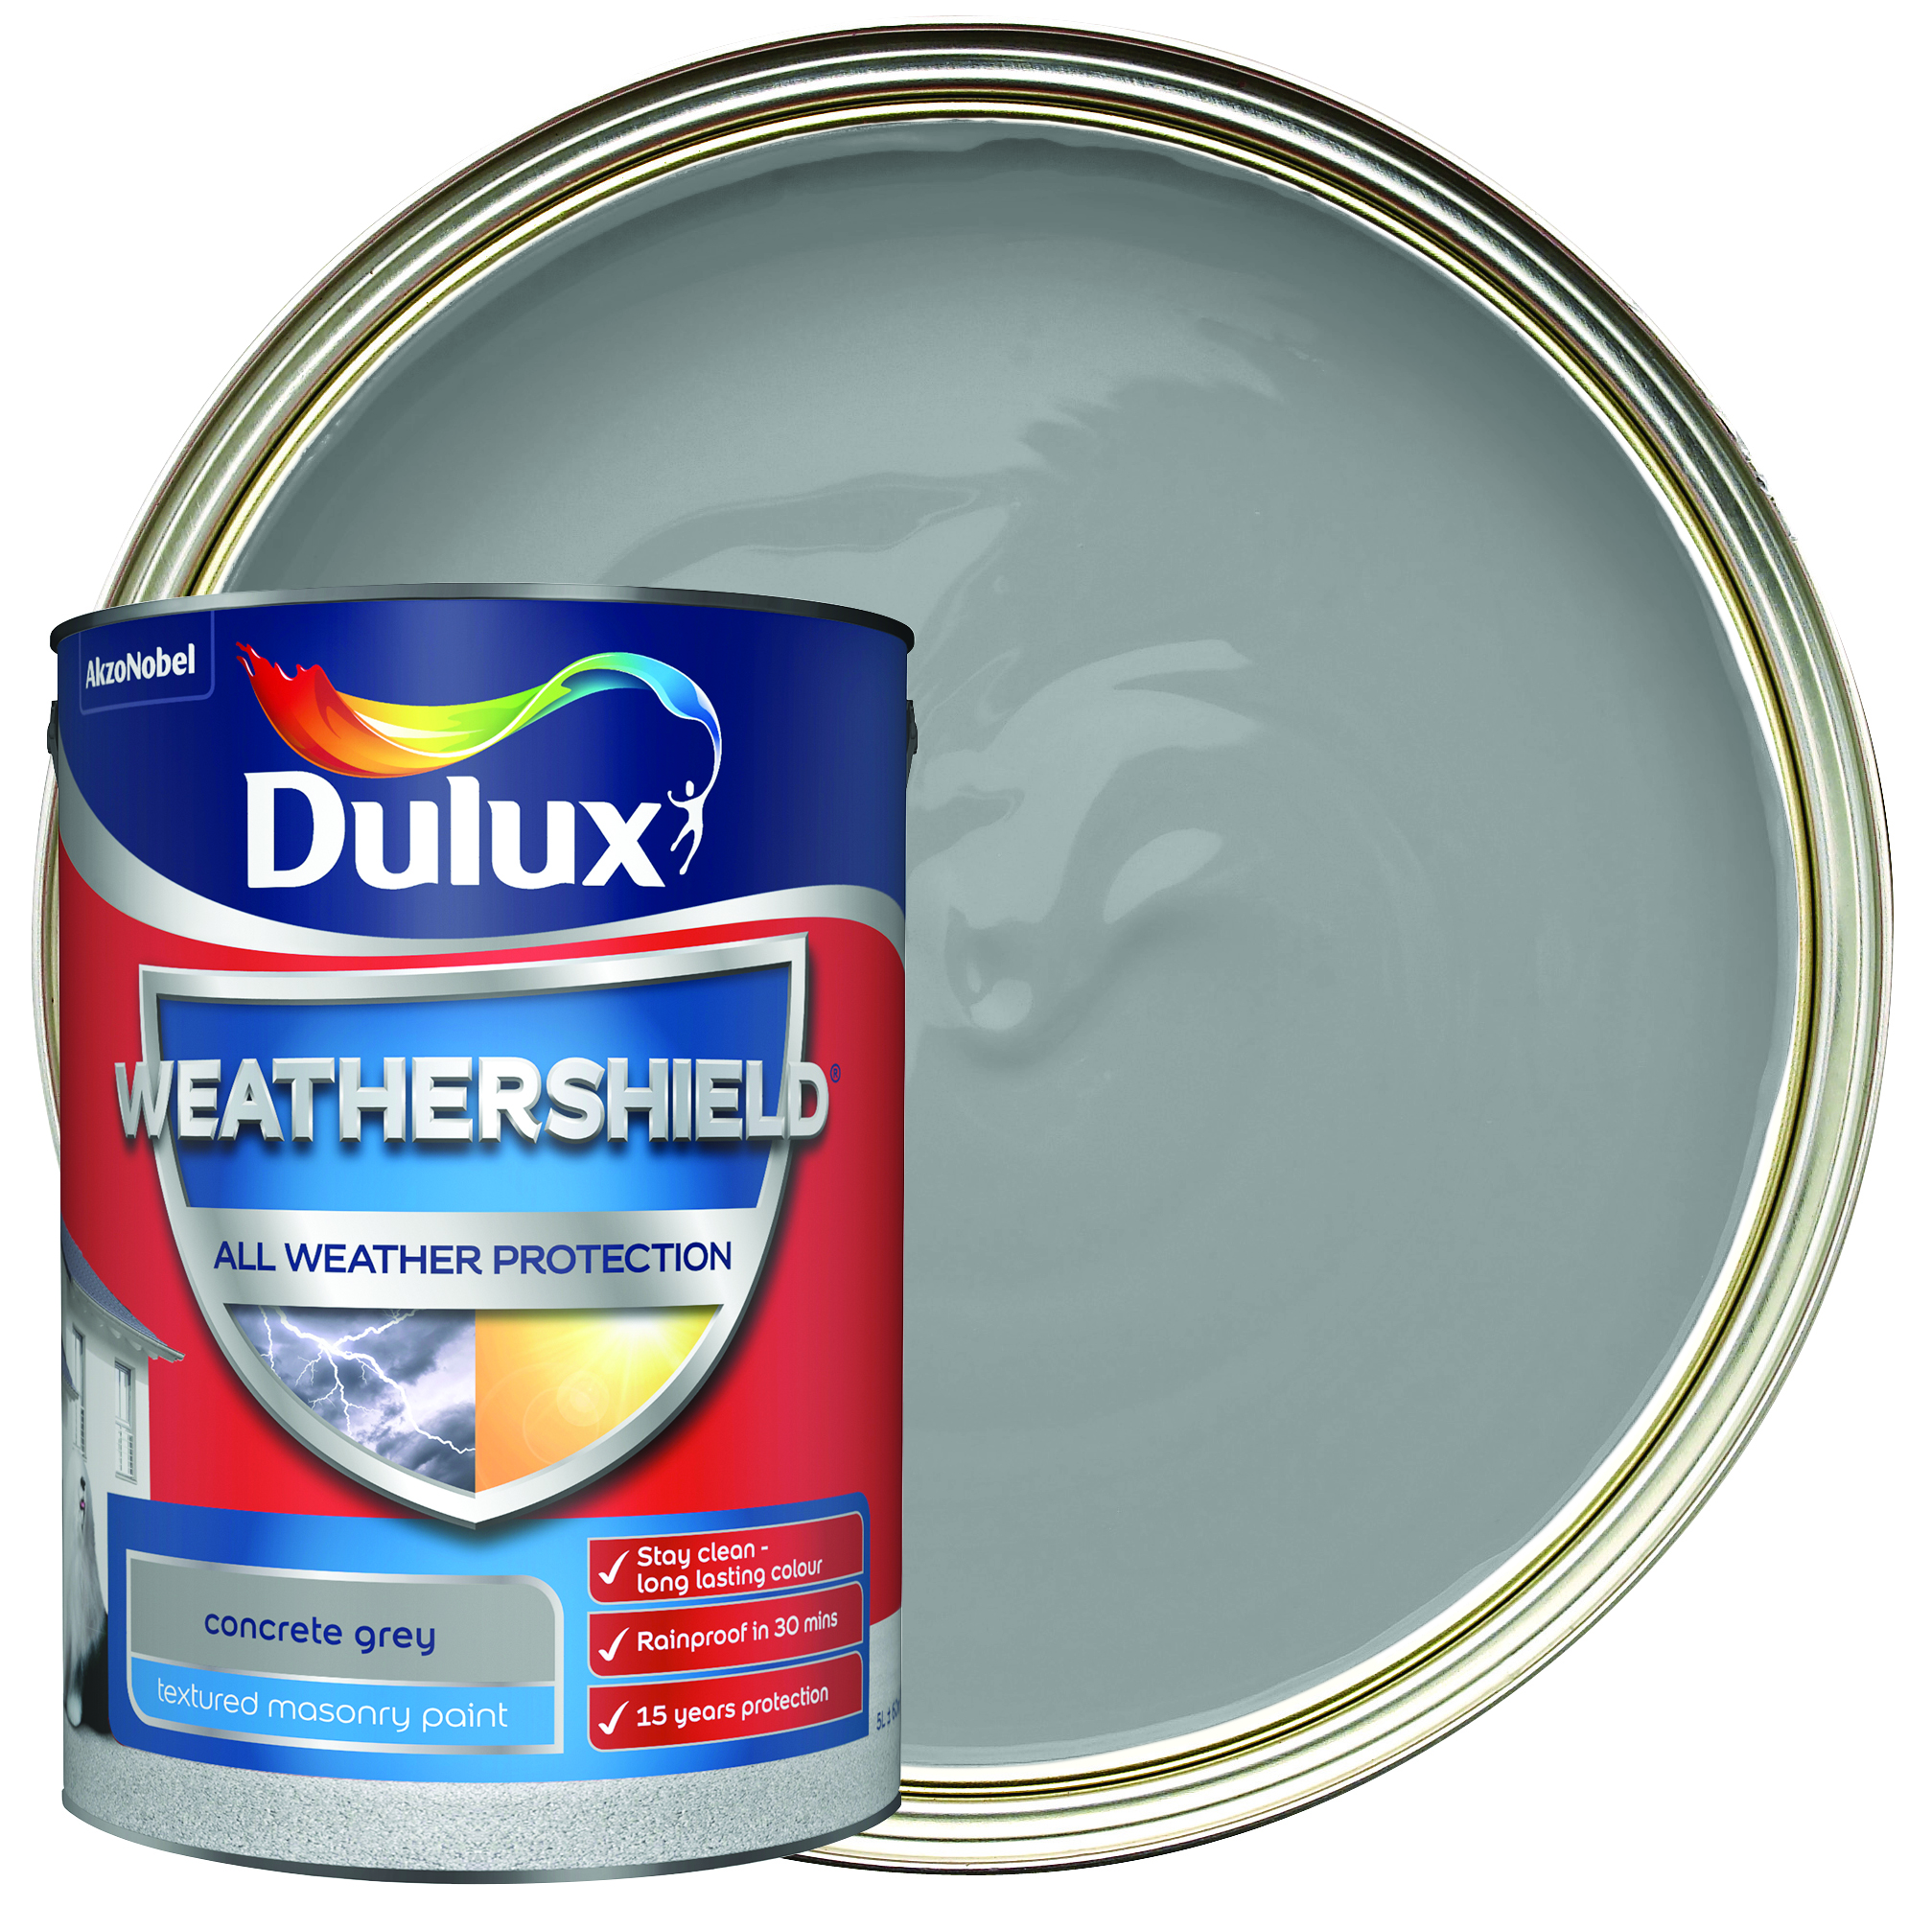 Image of Dulux Weathershield All Weather Purpose Smooth Paint - Concrete Grey - 5L